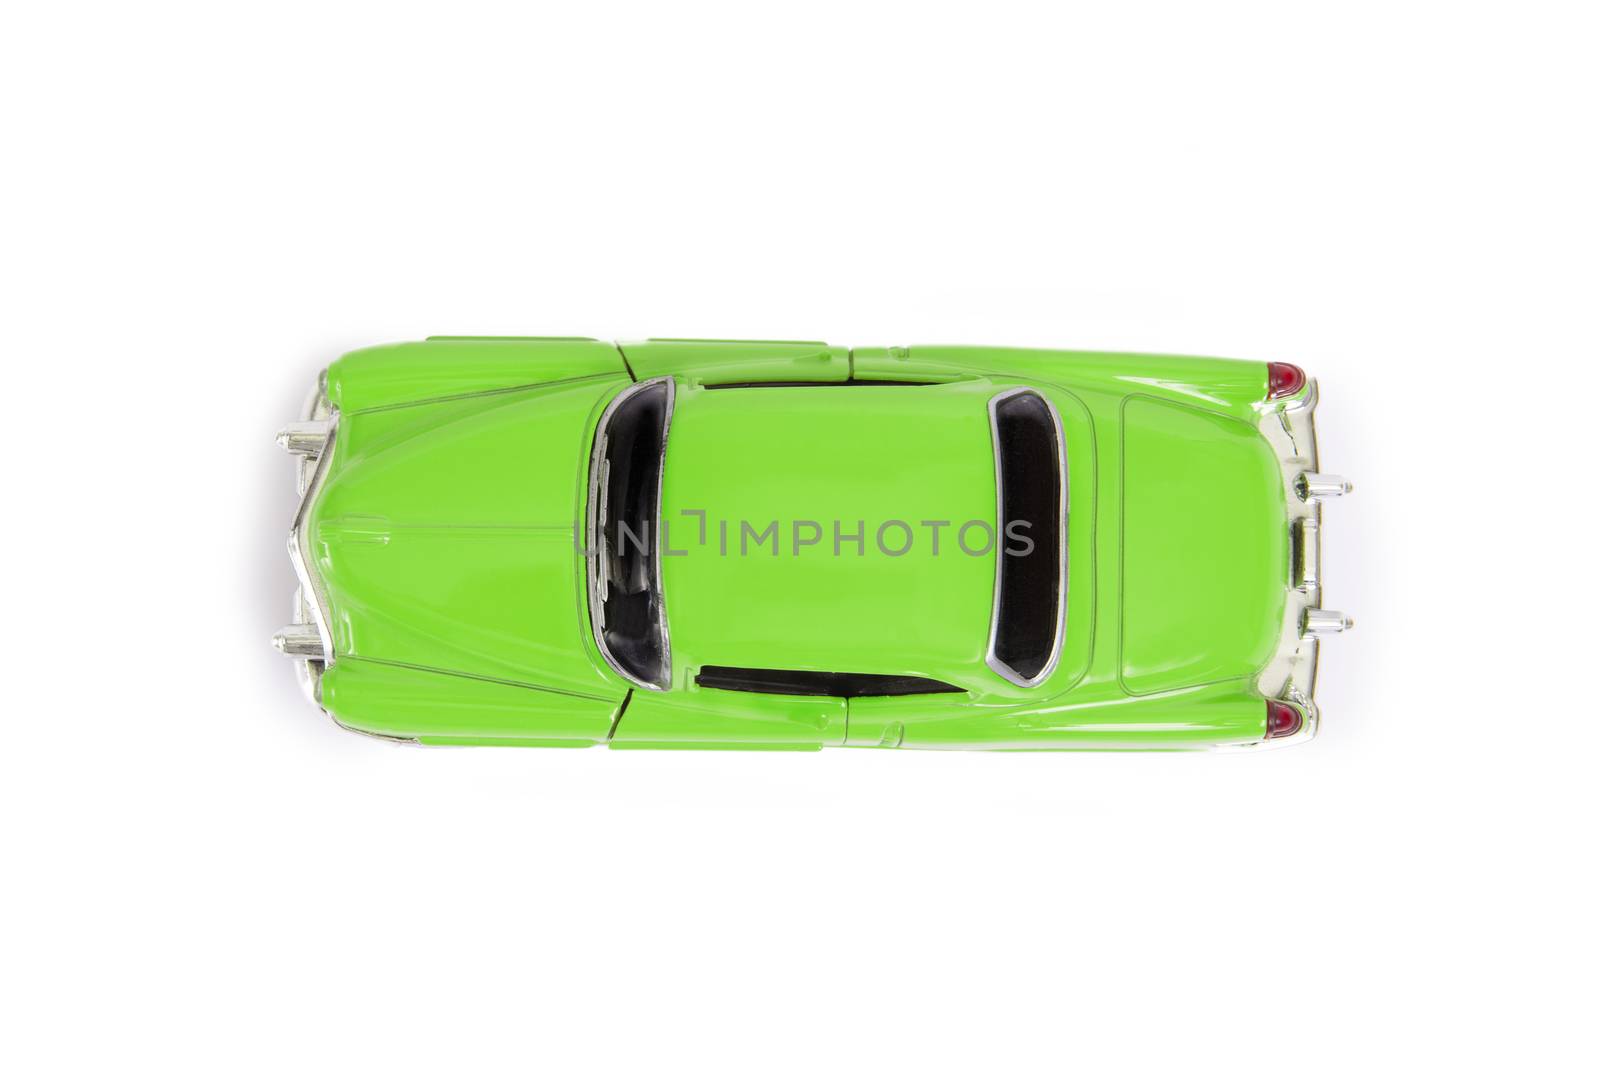 Top view of green model toy car in retro style on white background.